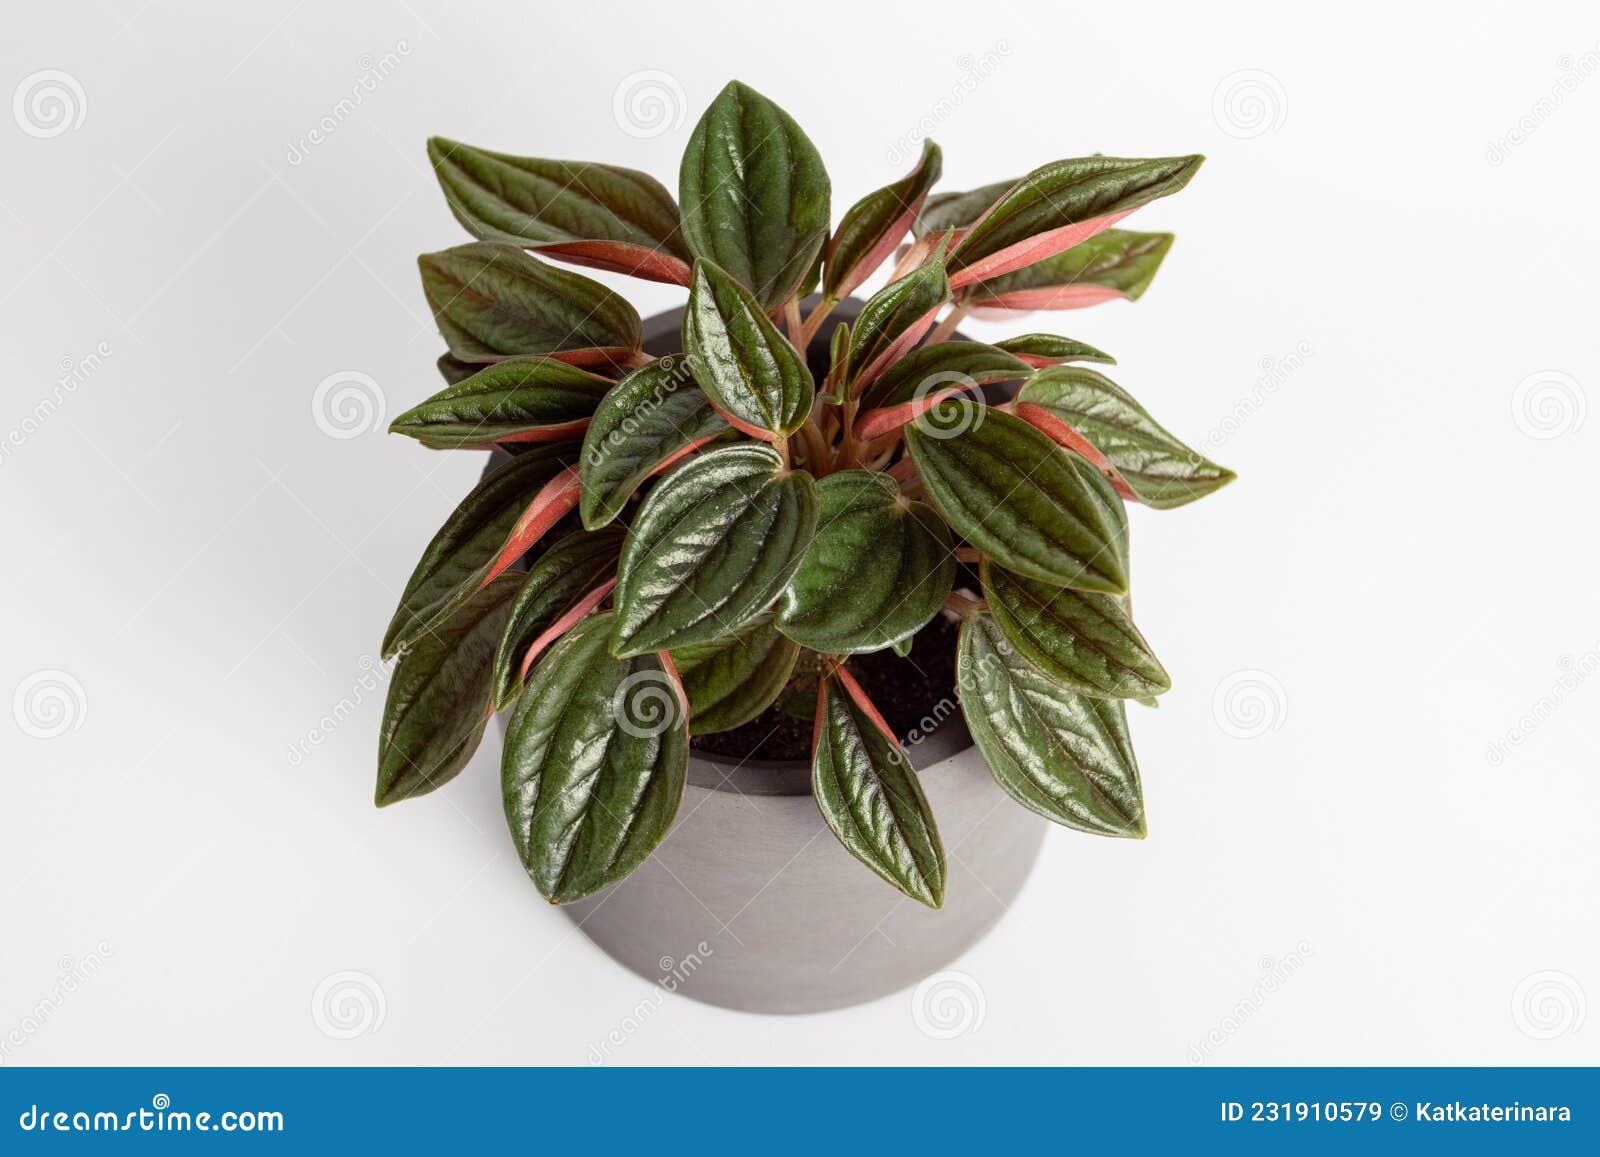 peperomia caperata rosso plants with beautiful leaves texture  on white background, potted plant